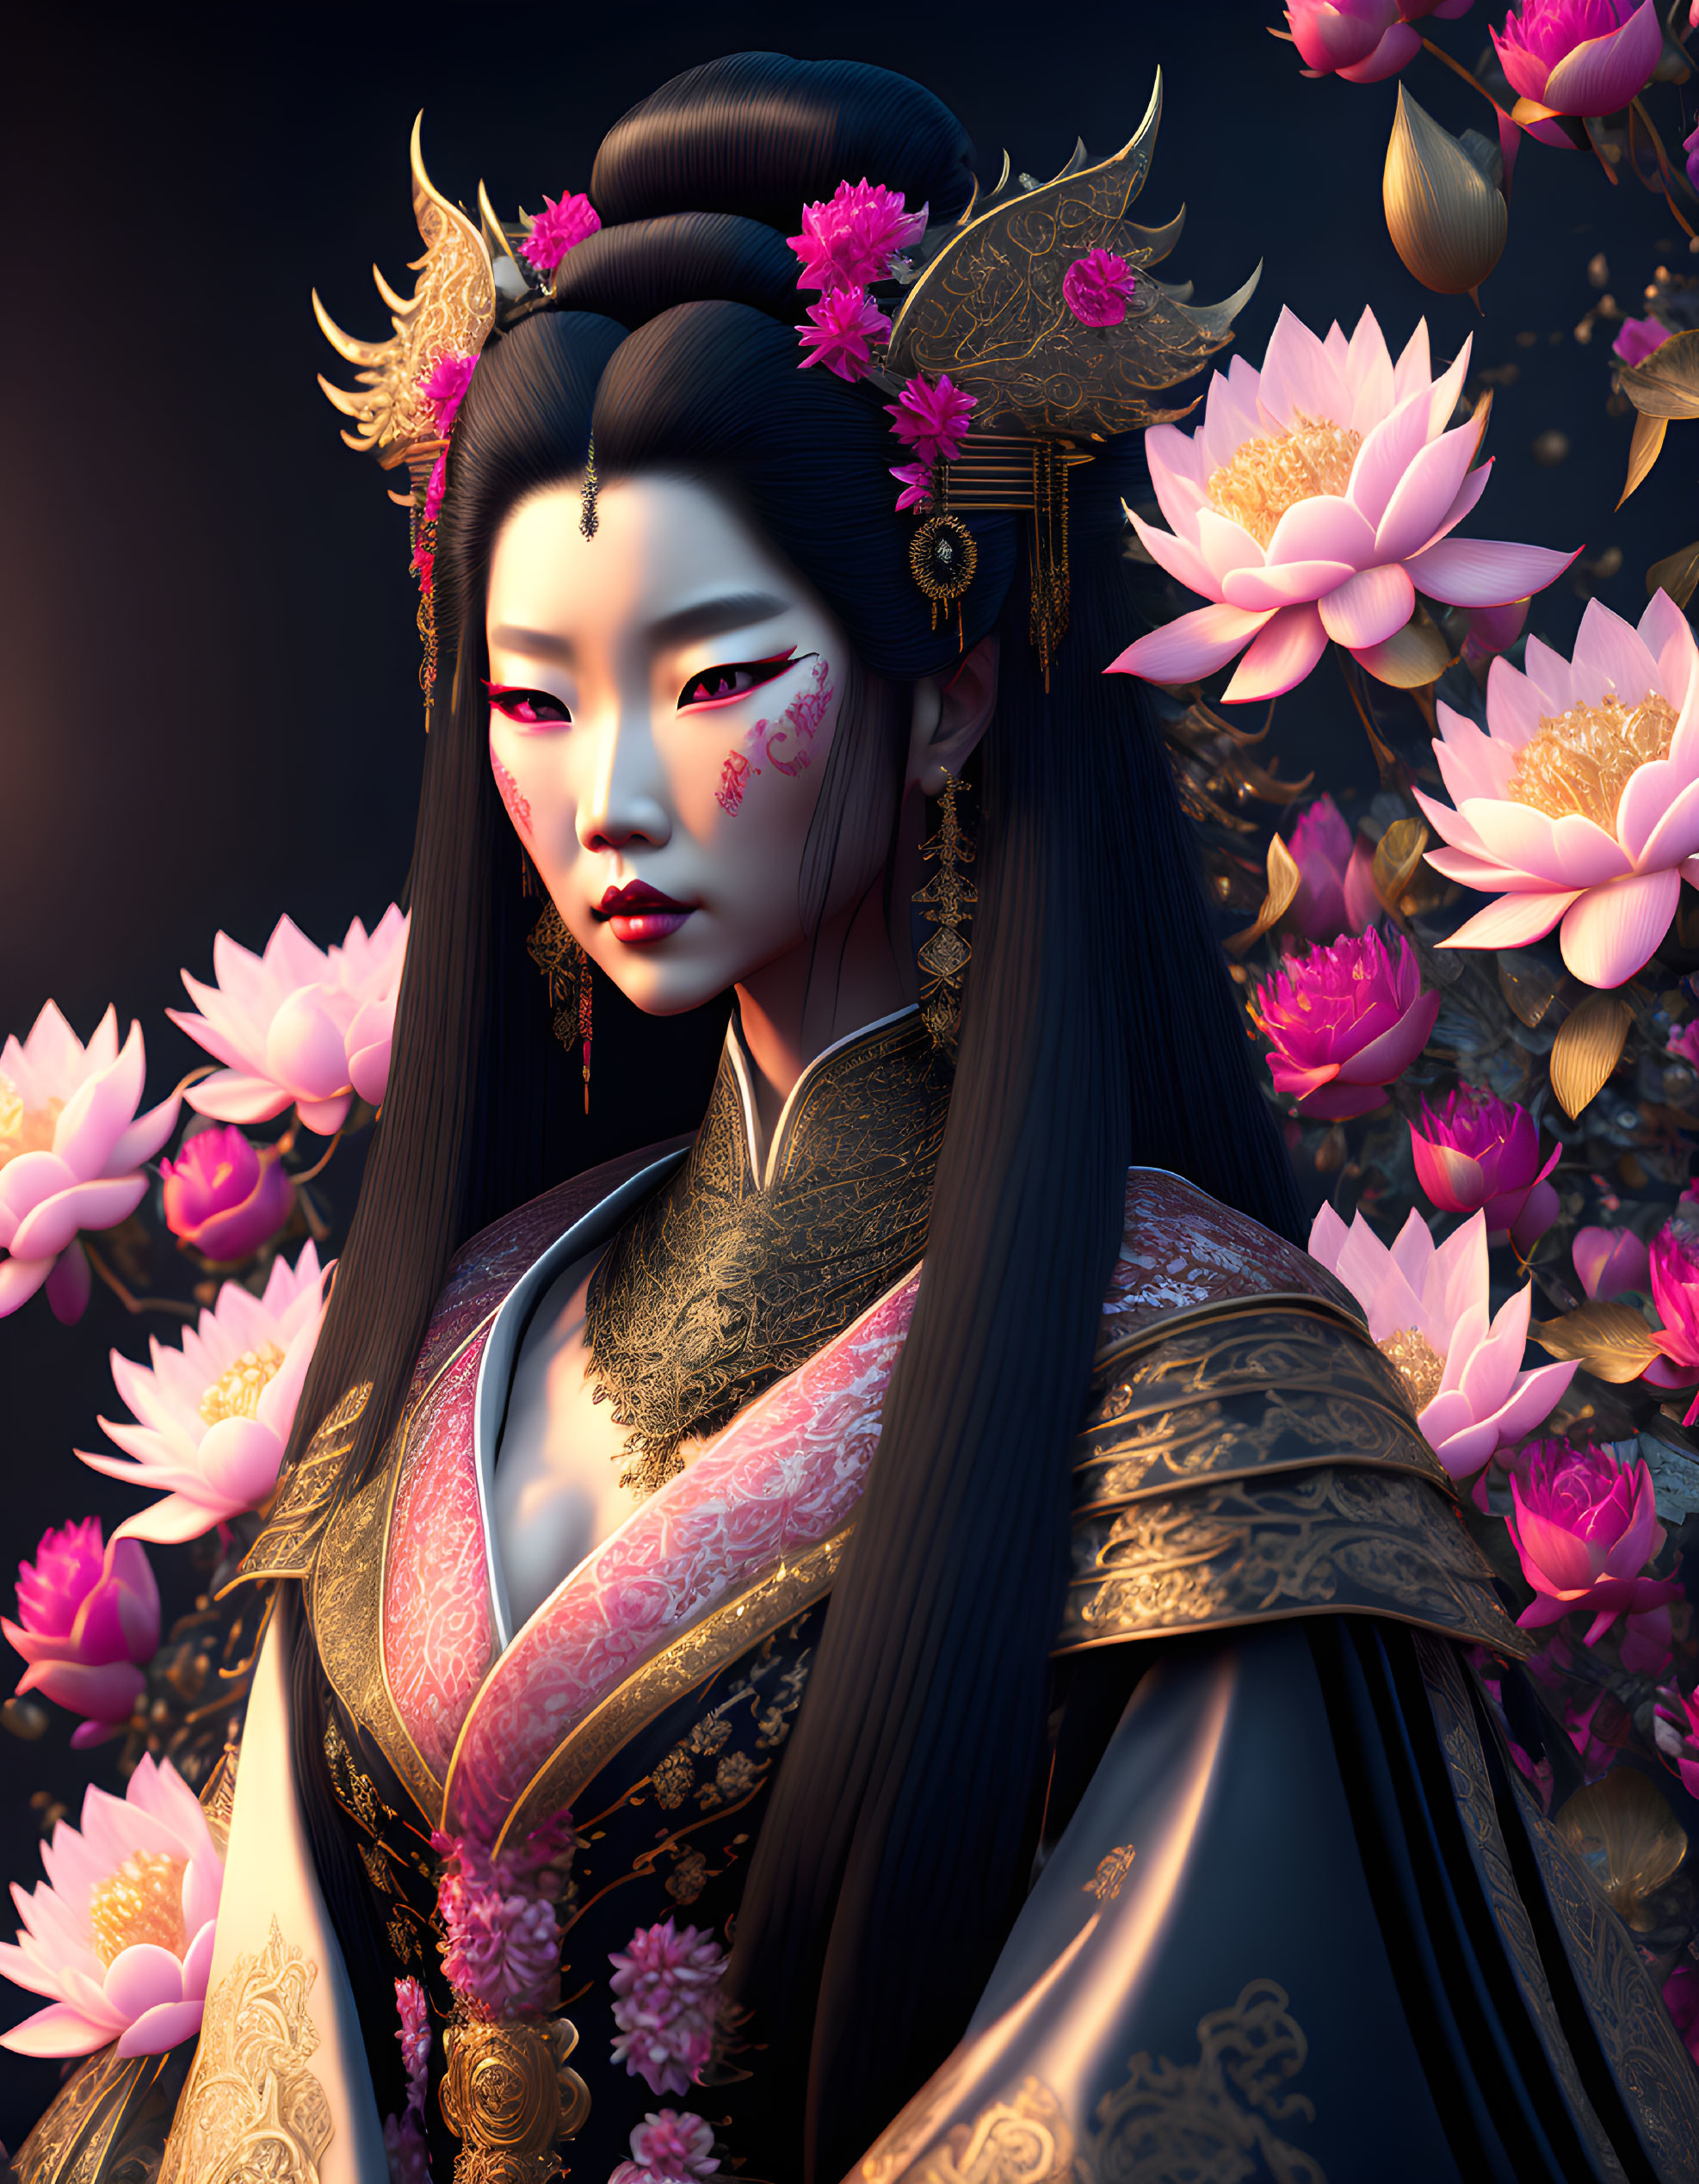 Illustrated woman in traditional East Asian attire with pink flowers and gold jewelry among pink lotus flowers